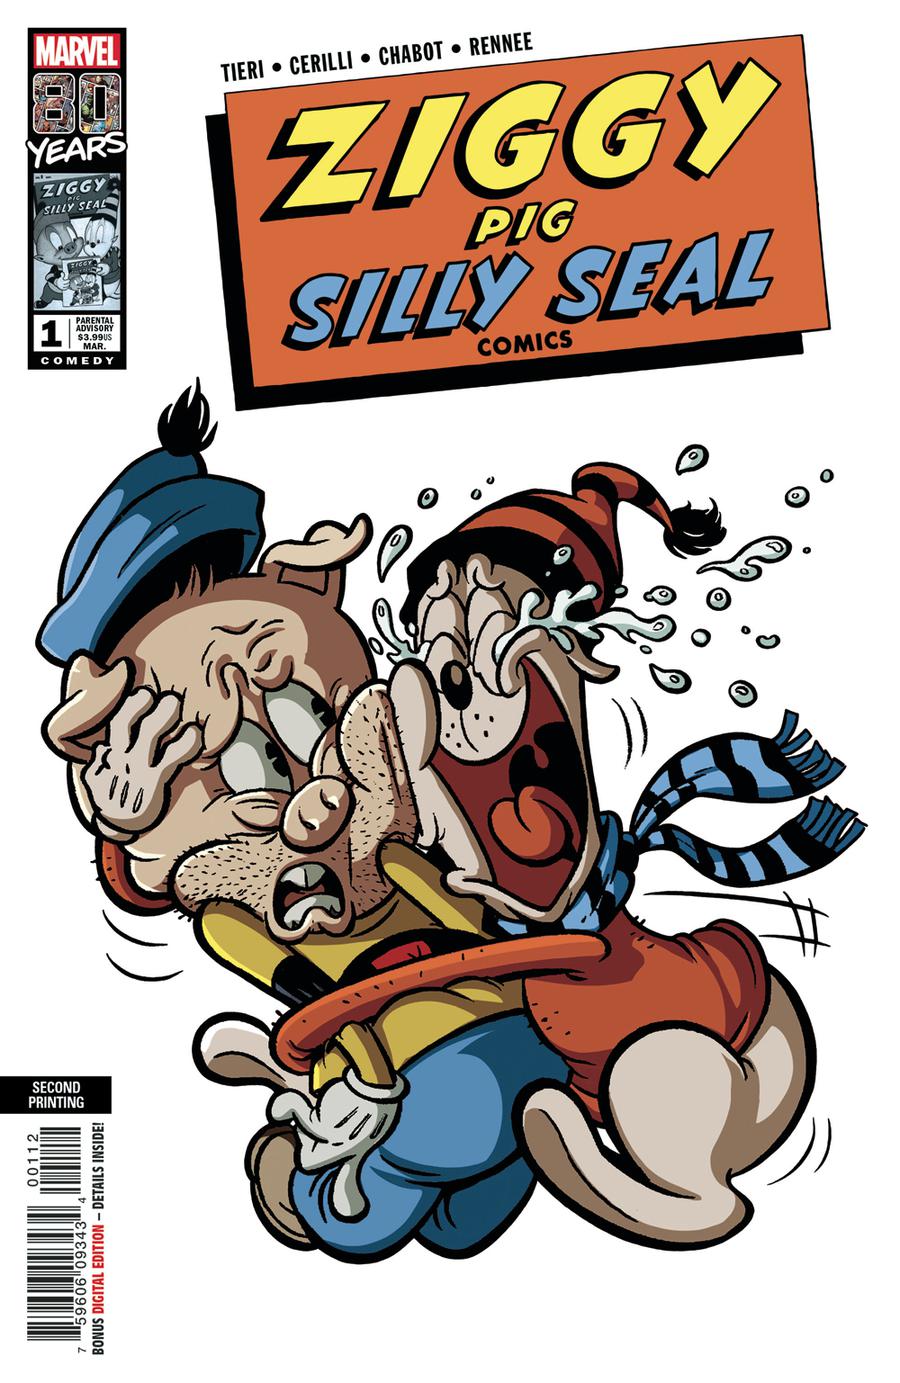 Ziggy Pig-Silly Seal Comics One Shot Cover Cover D 2nd Ptg Variant Jacob Chabot Cover